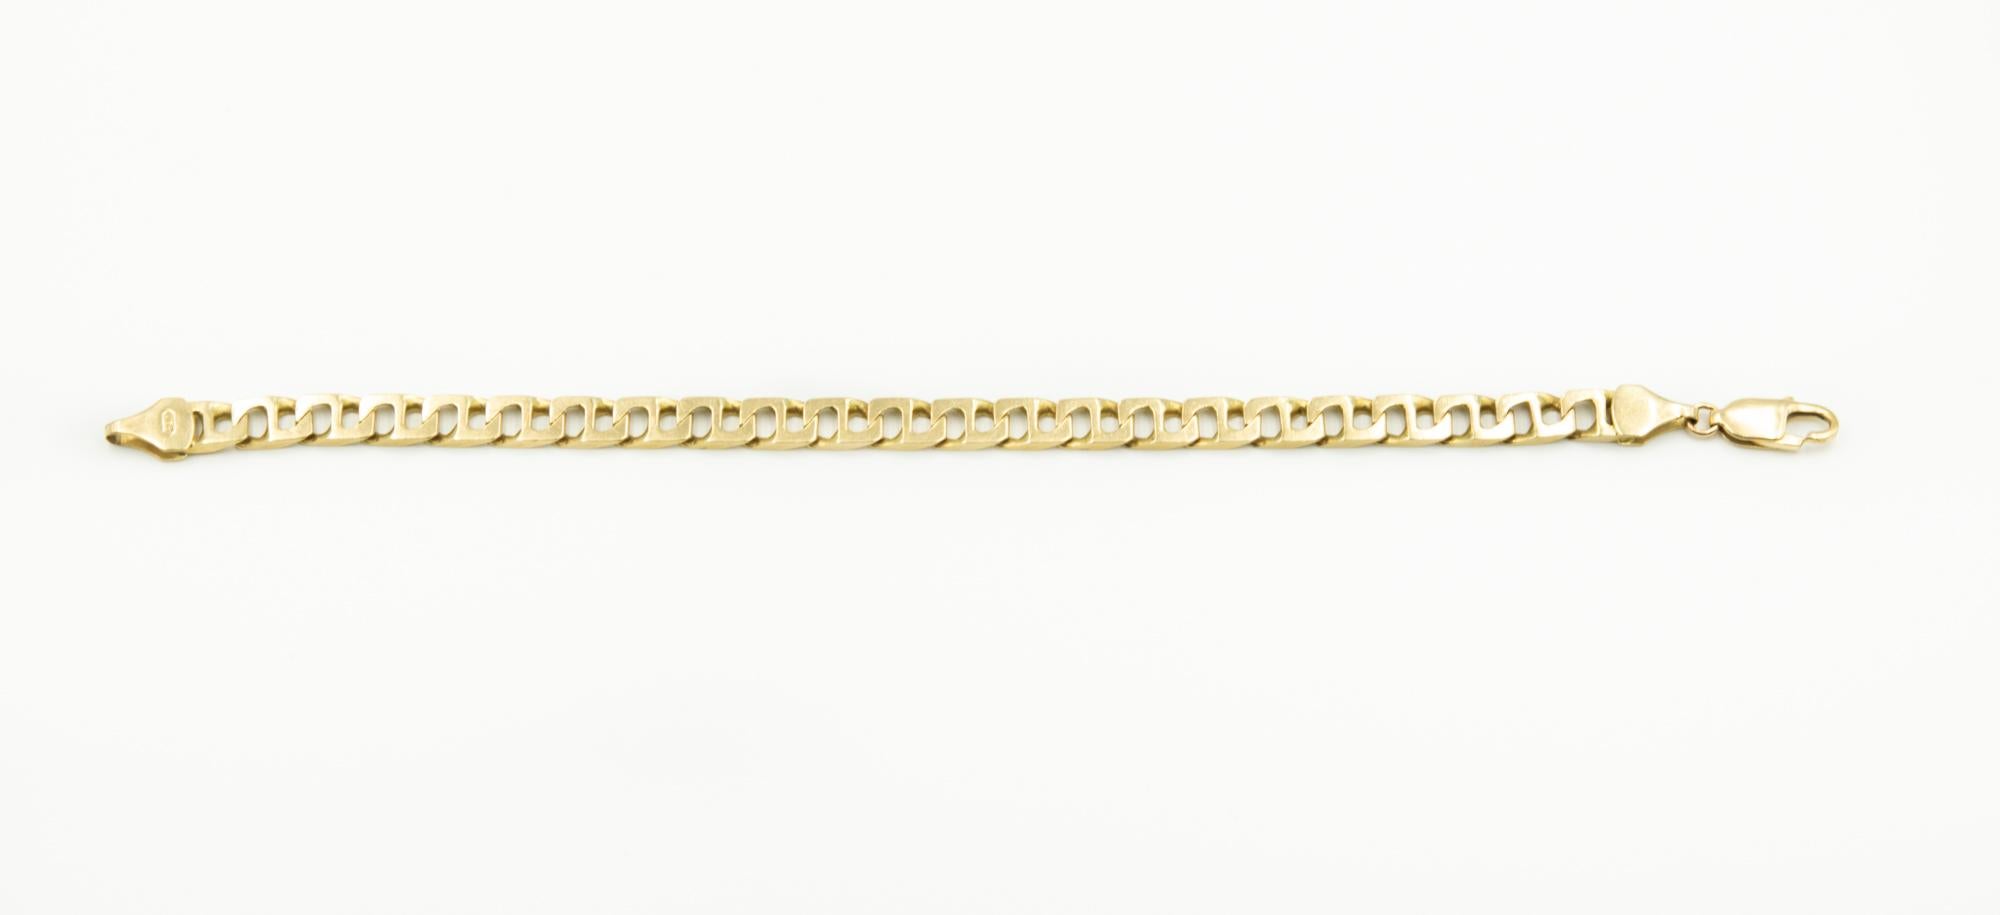 Elegant  14k yellow gold rectangular mariner link (also looks like an 8) men's bracelet featuring a lobster clasp closure.  The bracelet is 8.5